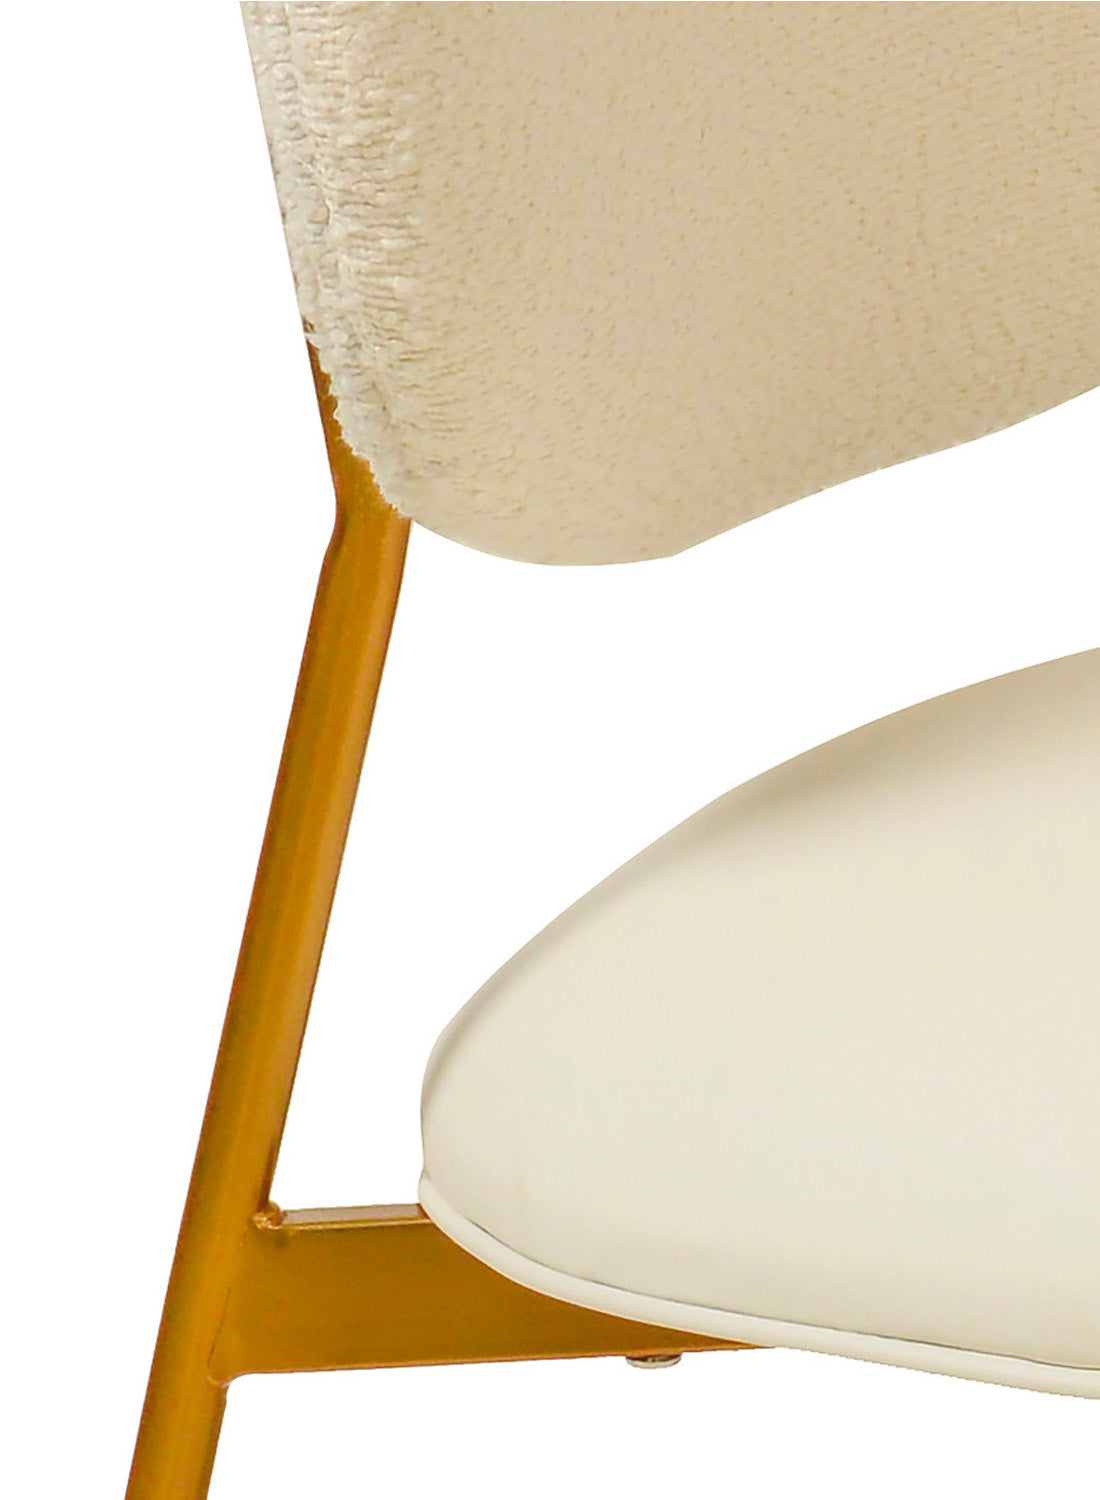 Grayson Boucle Dining Chair Set of 2, Cream